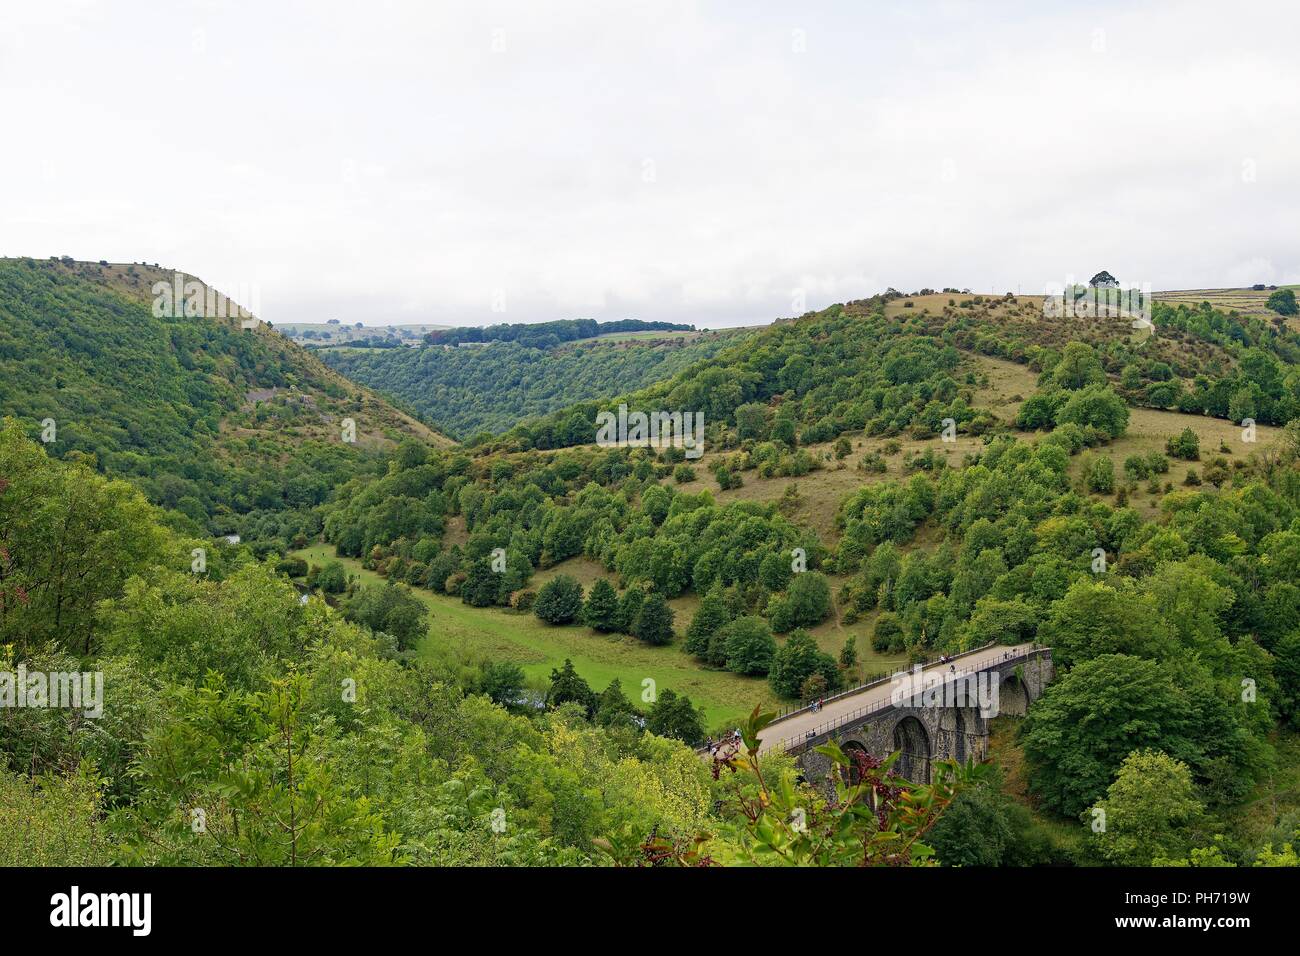 Capturing the awesome scale of the green and fertile Monsal valley that dwarfs an extensive railway viaduct, in the Peak District. Stock Photo